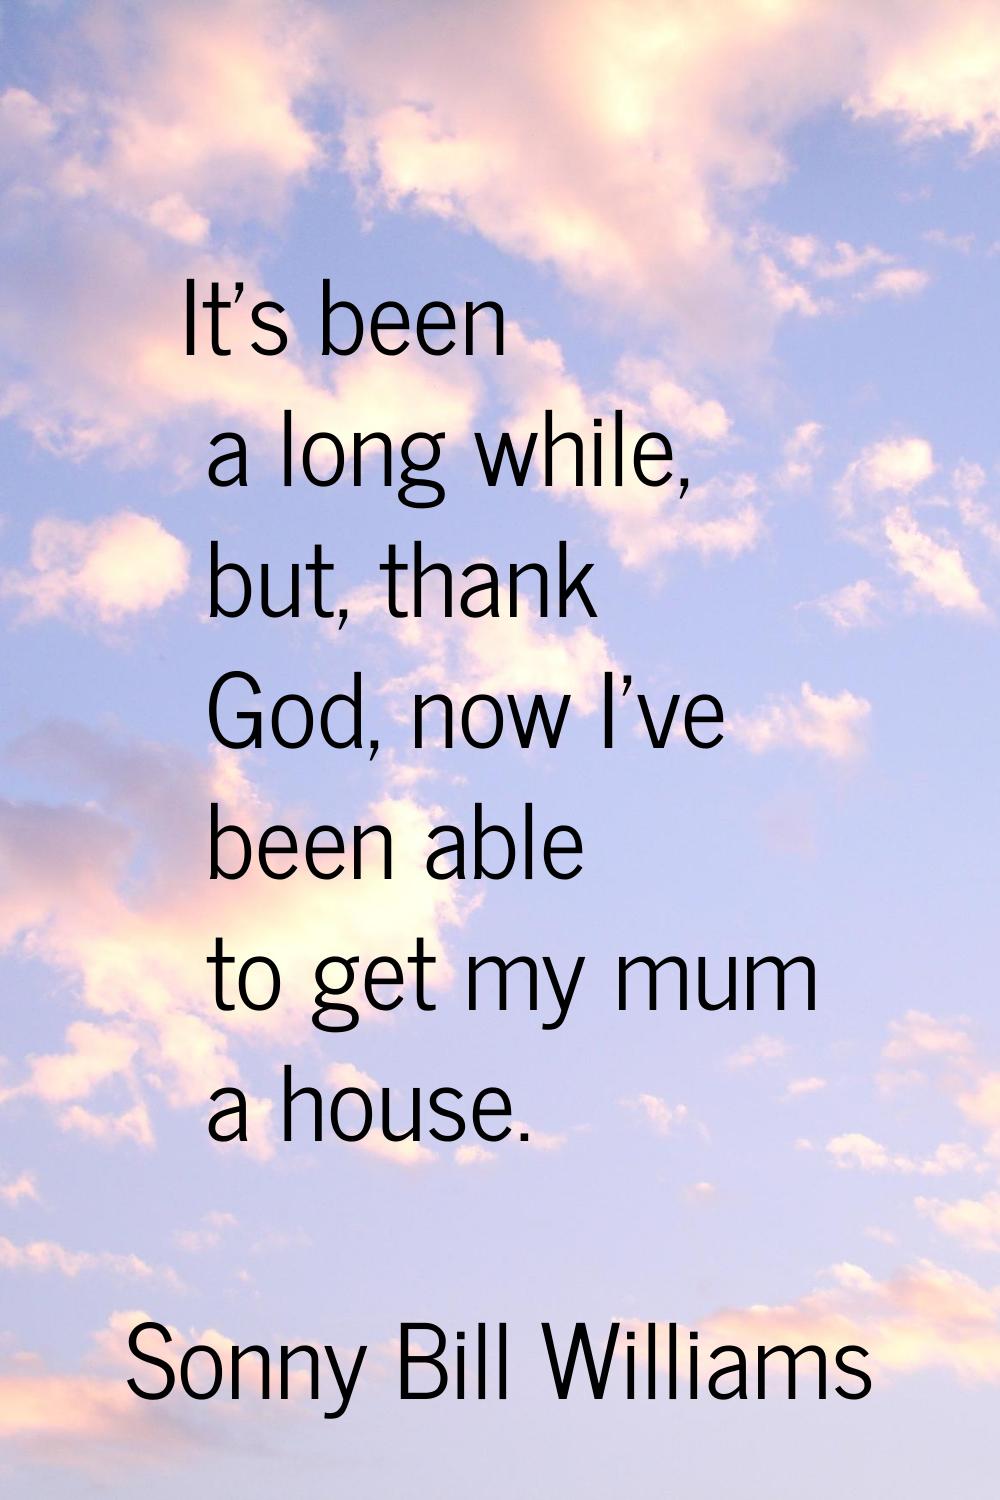 It's been a long while, but, thank God, now I've been able to get my mum a house.